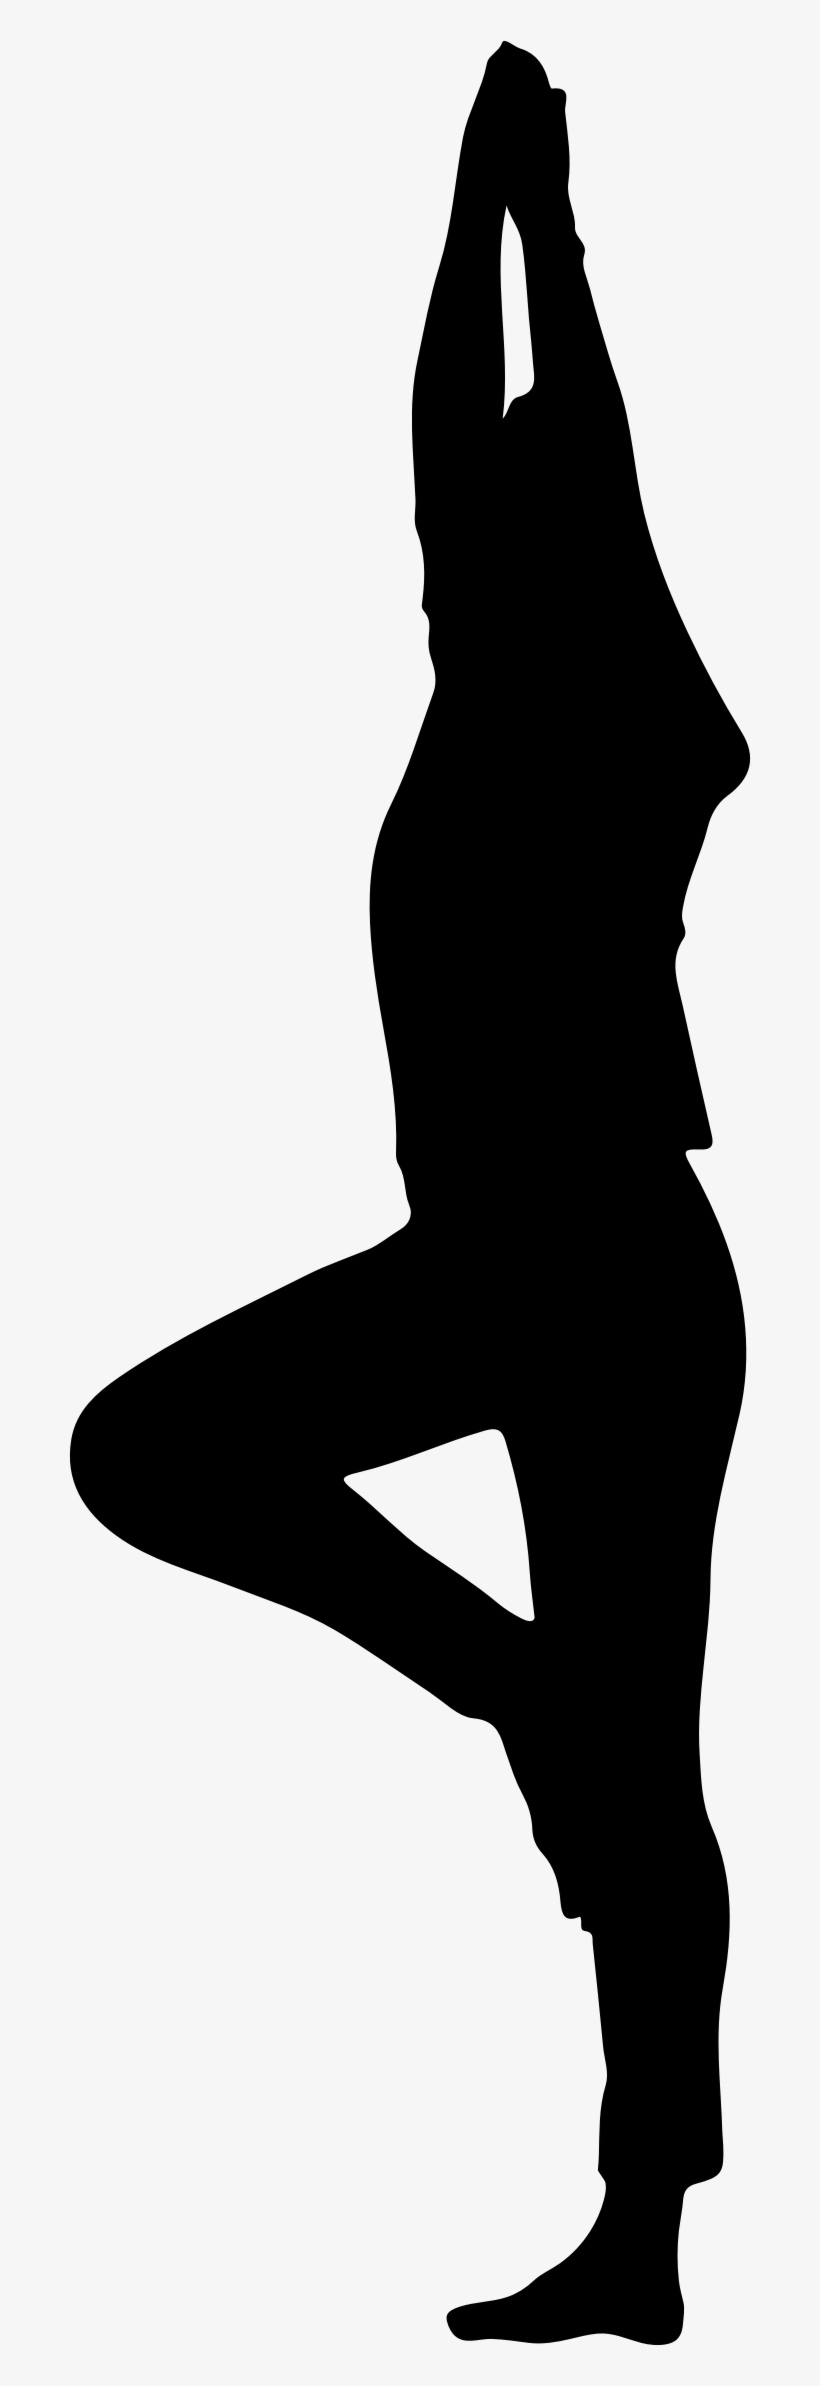 Yoga Pose Silhouette Png Download - Yoga Pregnancy Silhouette Png, transparent png #2497764